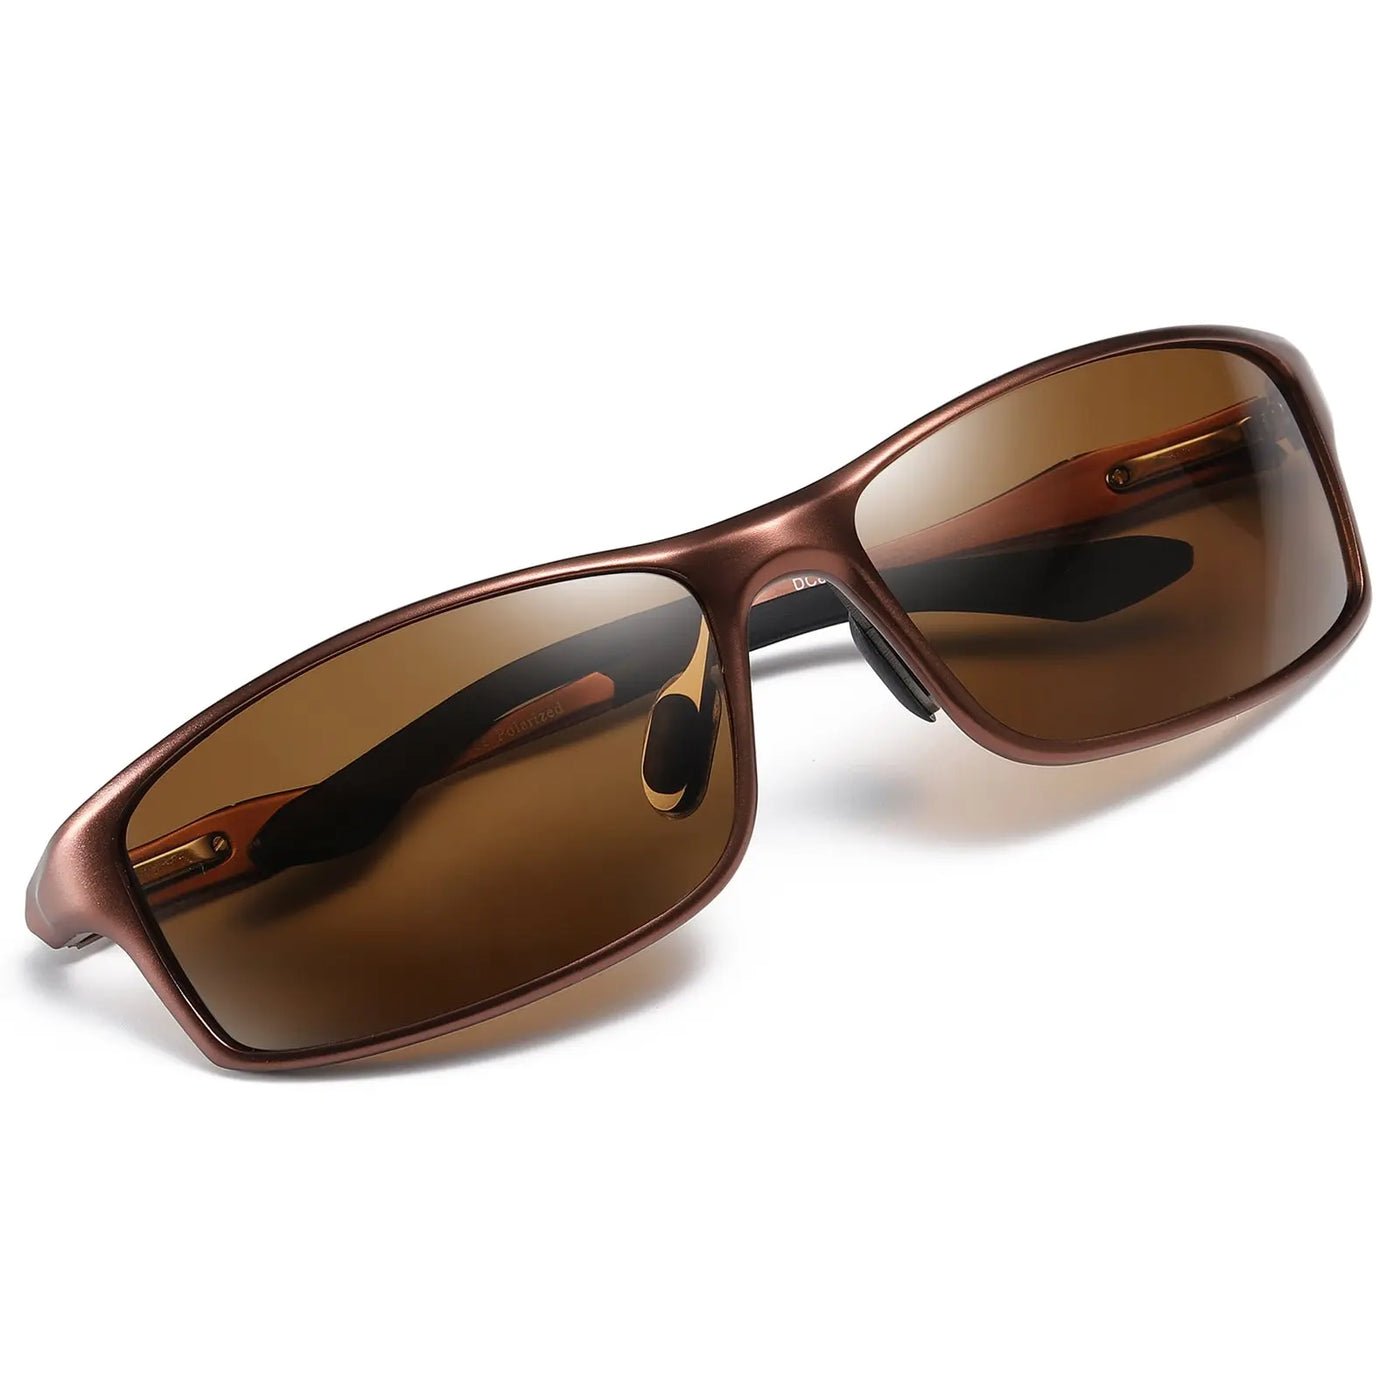 DUCO GLASSES-The right kind of shady Ember New DUCO Men